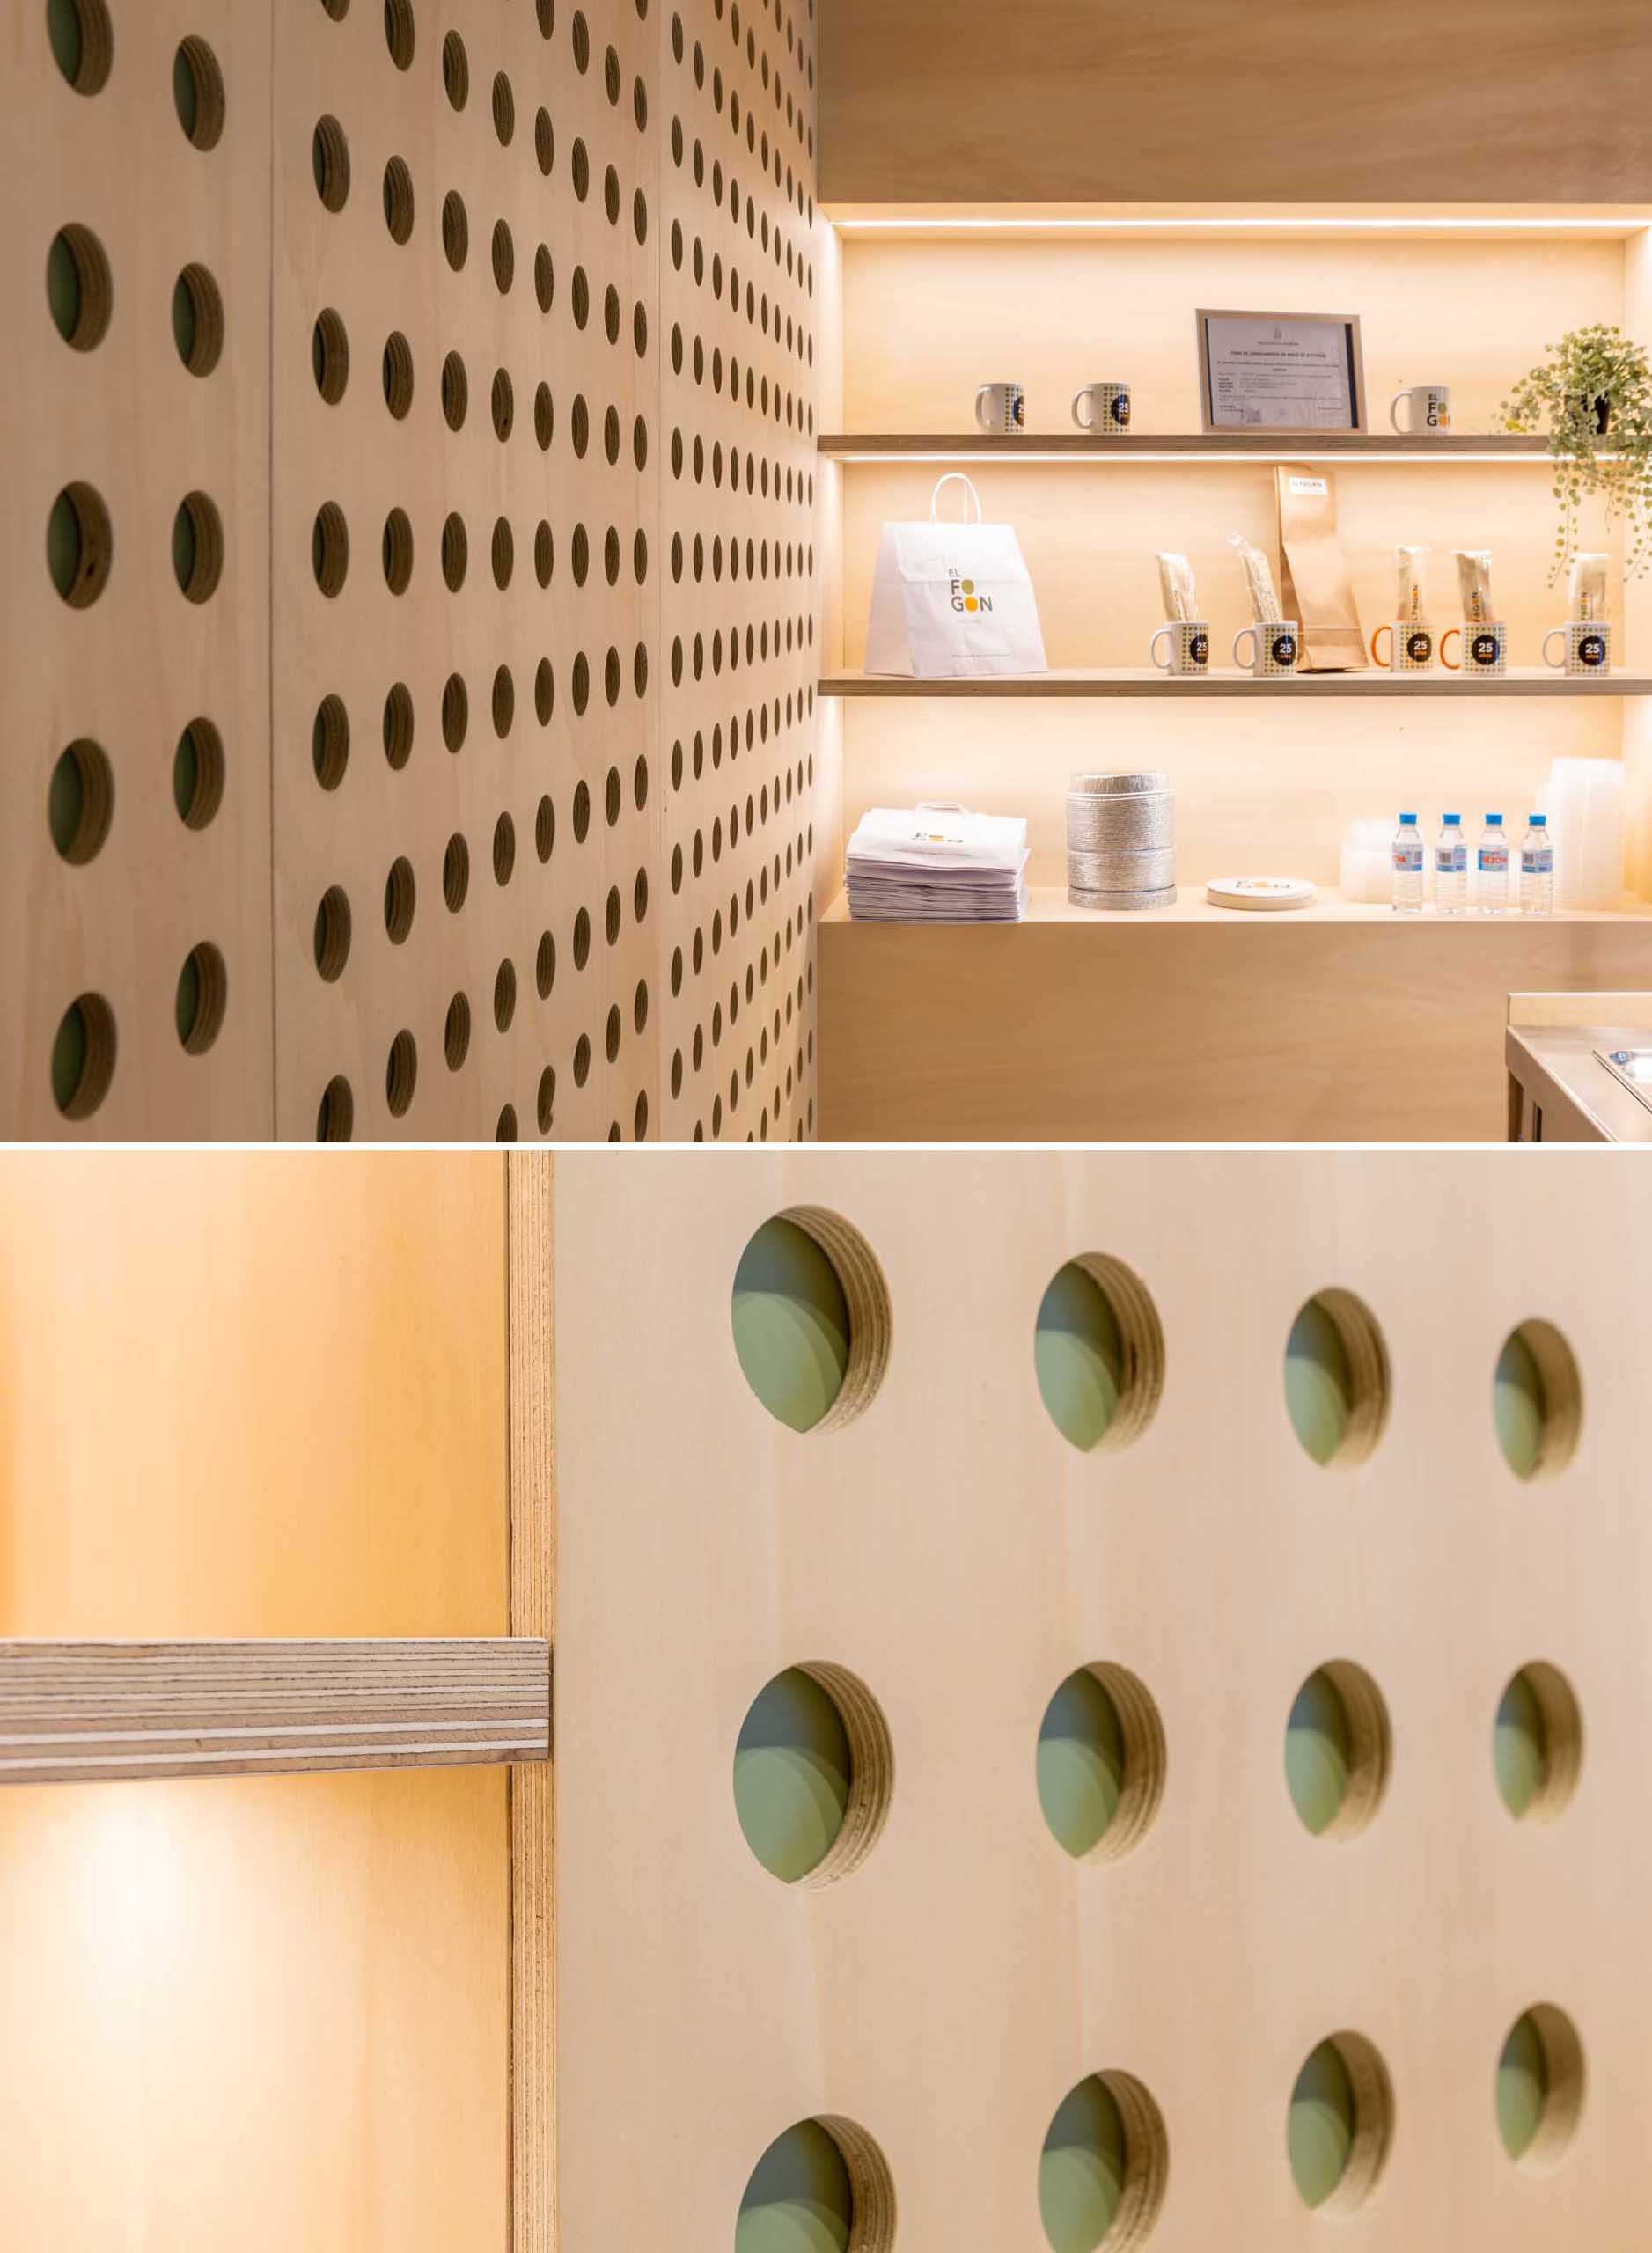 A modern takeaway shop with perforated wood panels and hidden lighting.